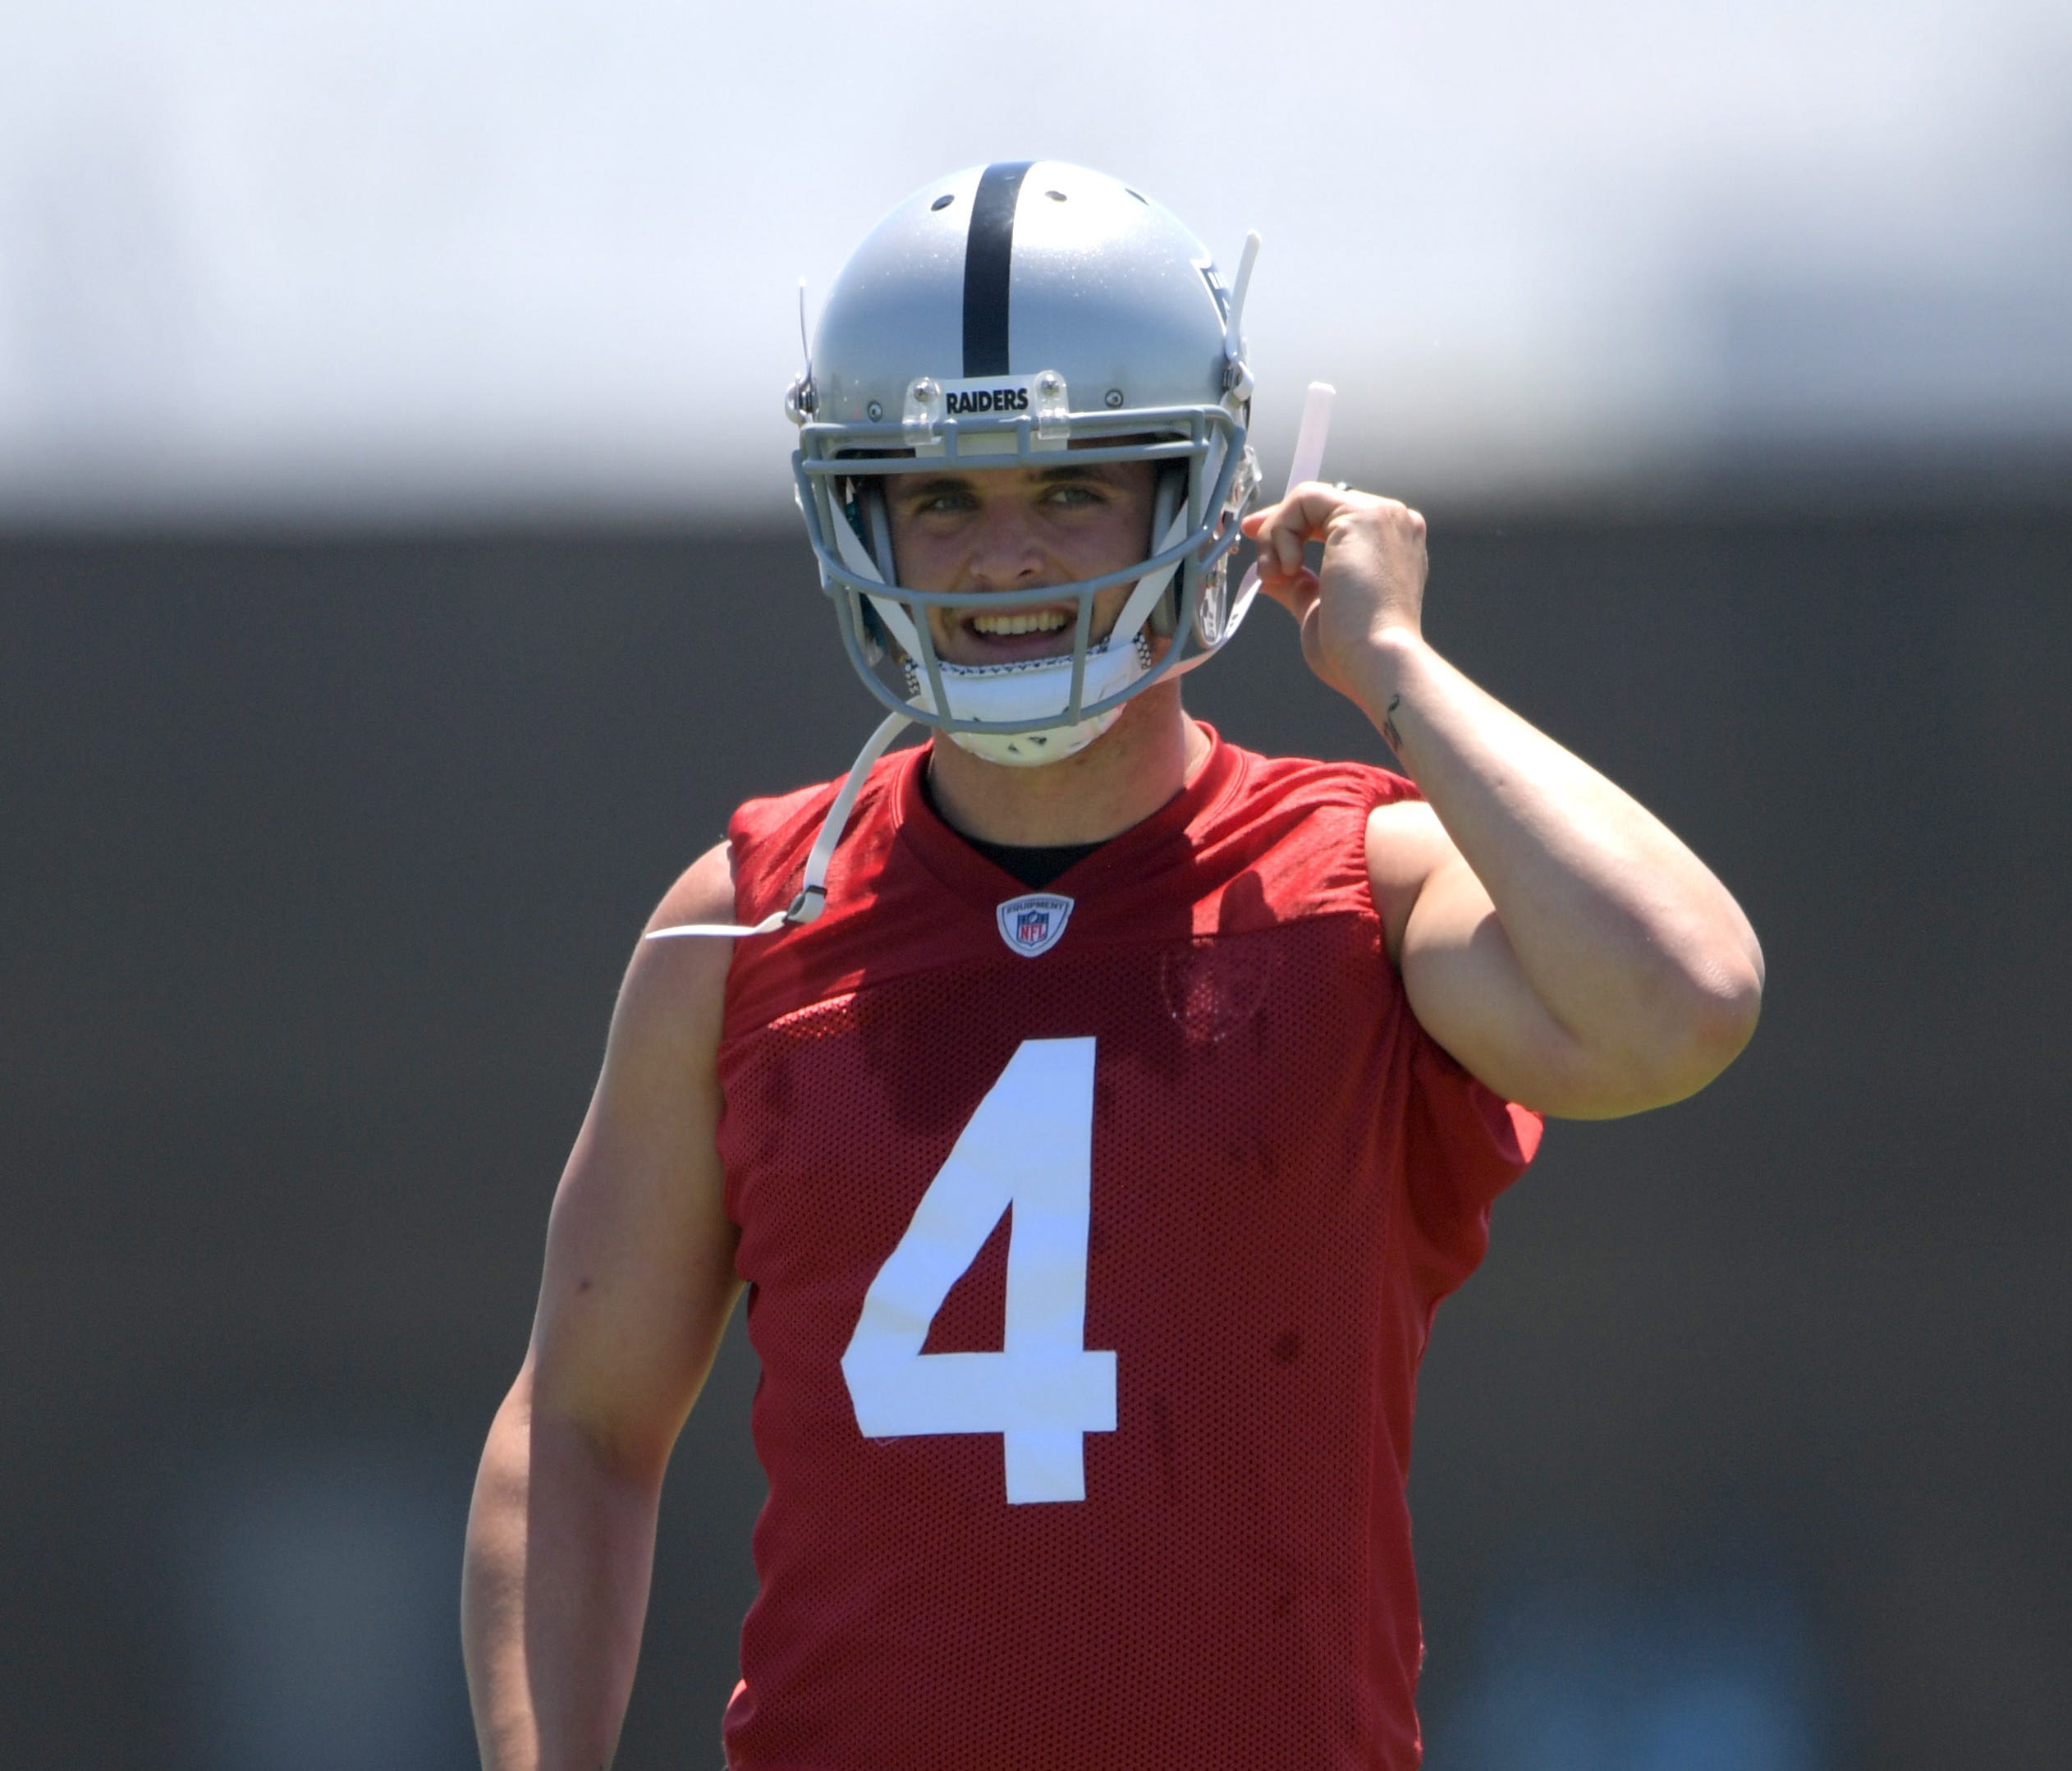 Oakland Raiders quarterback Derek Carr (4) reacts during organized team activities at the Raiders practice facility.